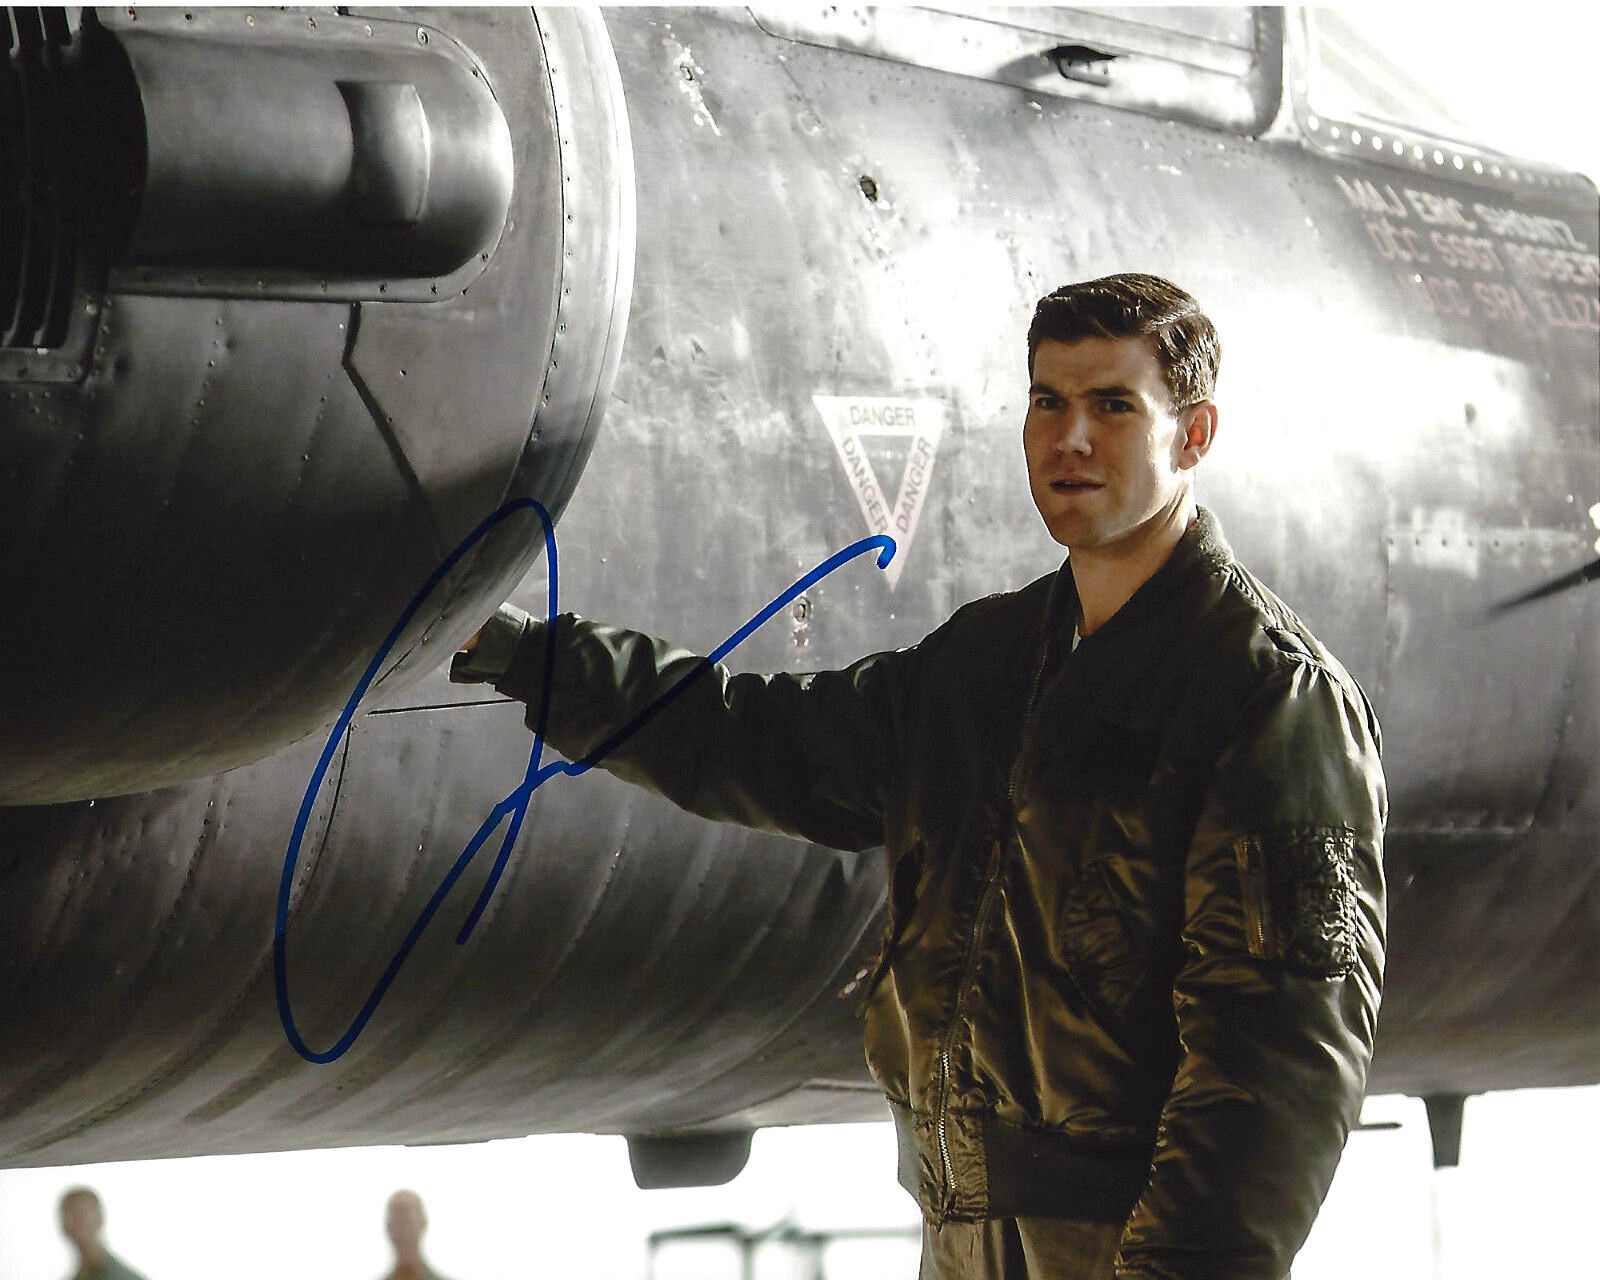 ACTOR AUSTIN STOWELL SIGNED MODEL PORTRAIT 8X10 Photo Poster painting 2 W/COA WHIPLASH COLOSSAL